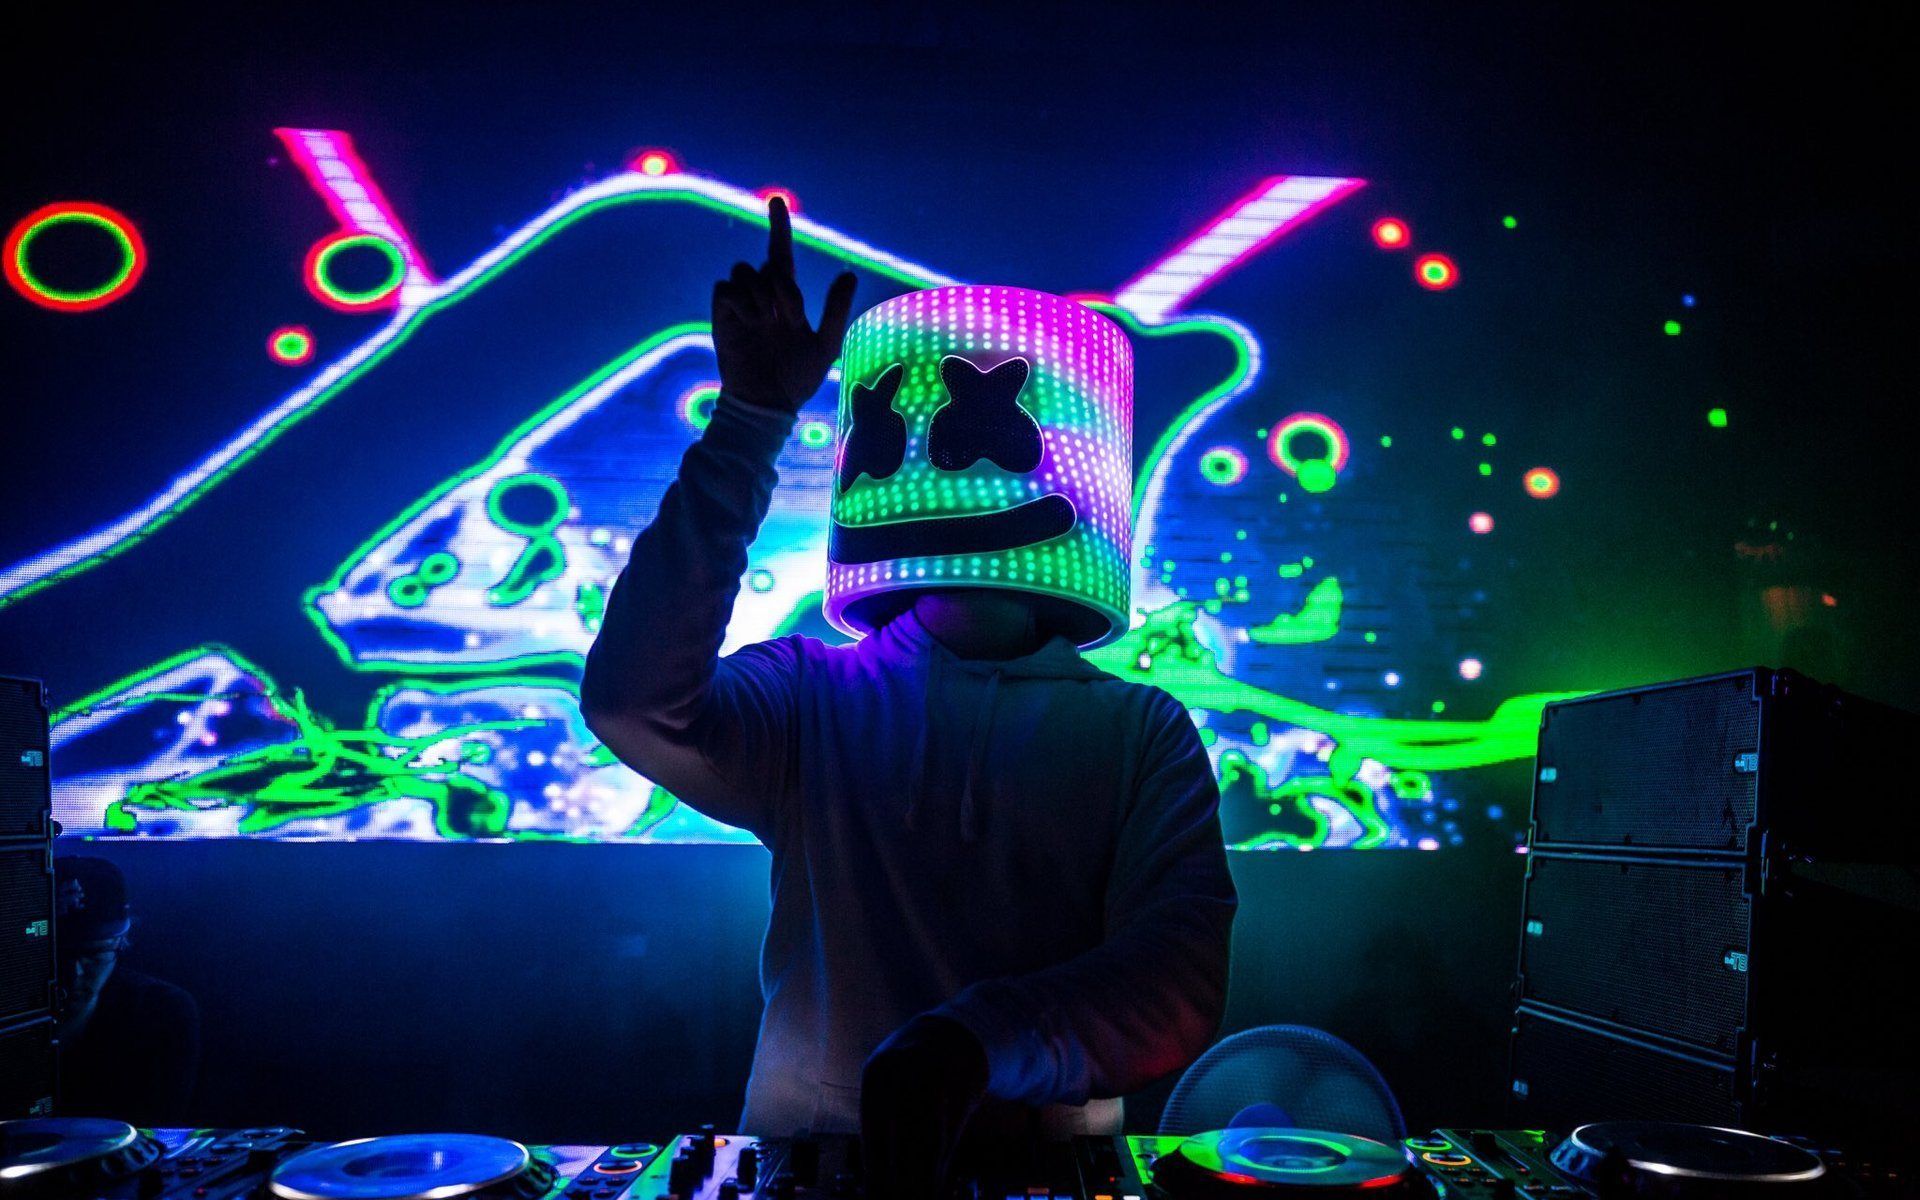 1920x1200 Download Wallpaper Marshmello Night Club Dj Neon Light Progressive House Concert For Desktop With Resolution 1920x1200 High Quality Hd Picture Wallpaper